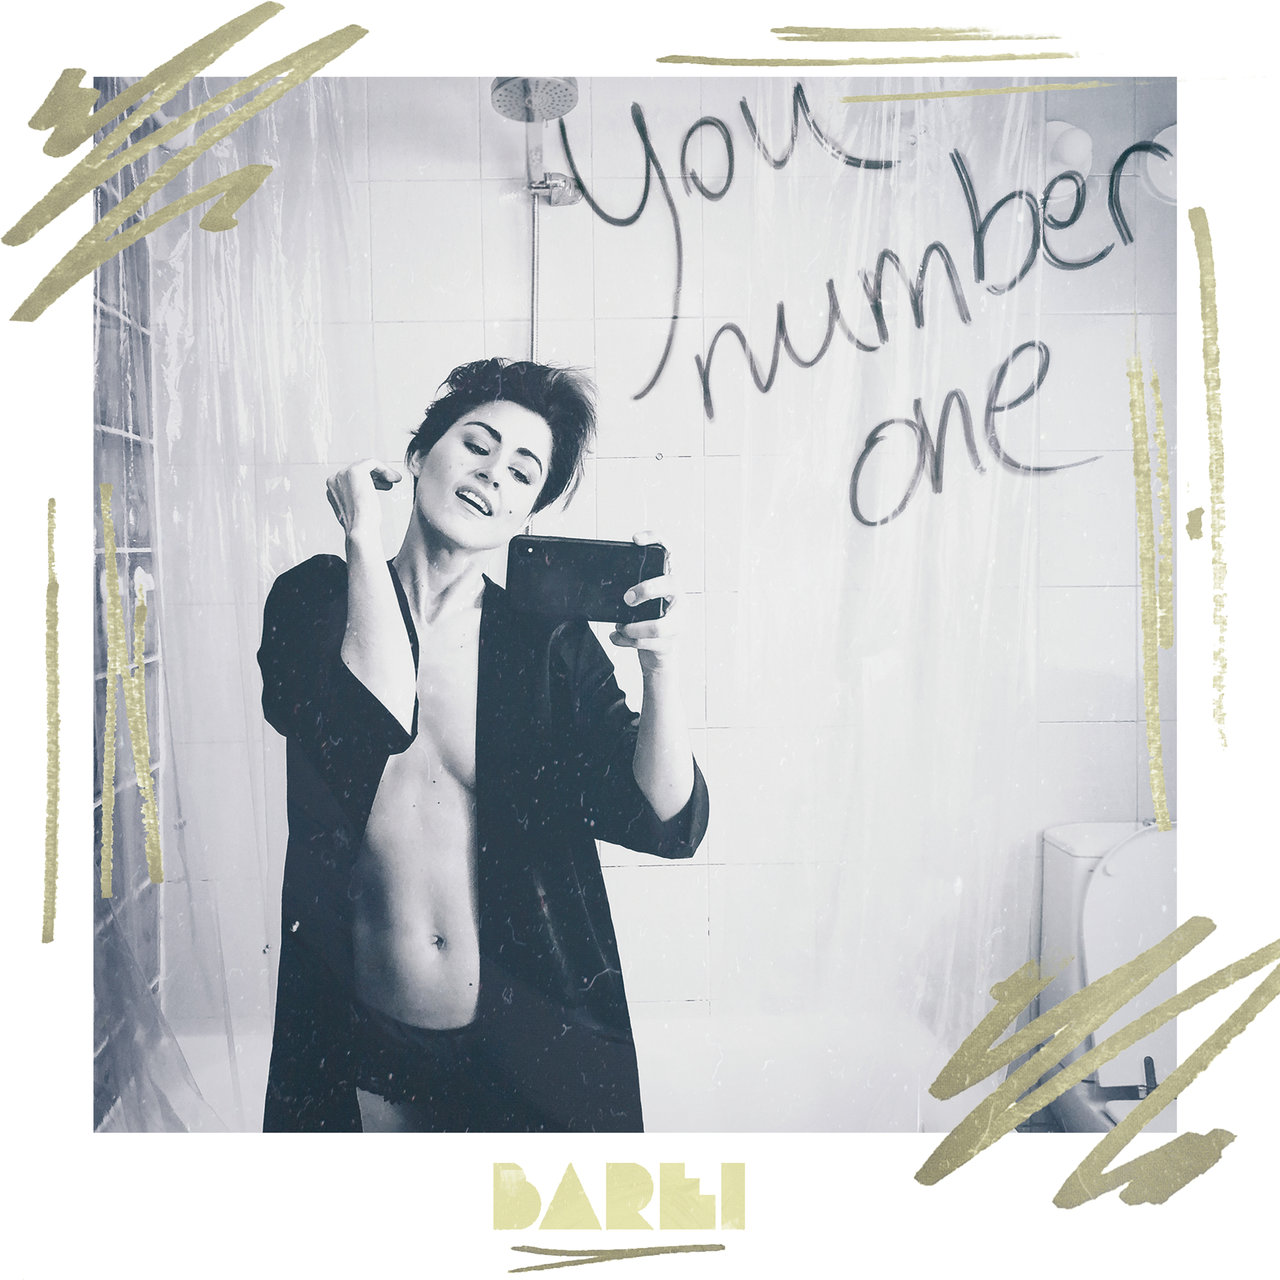 Barei You Number One cover artwork